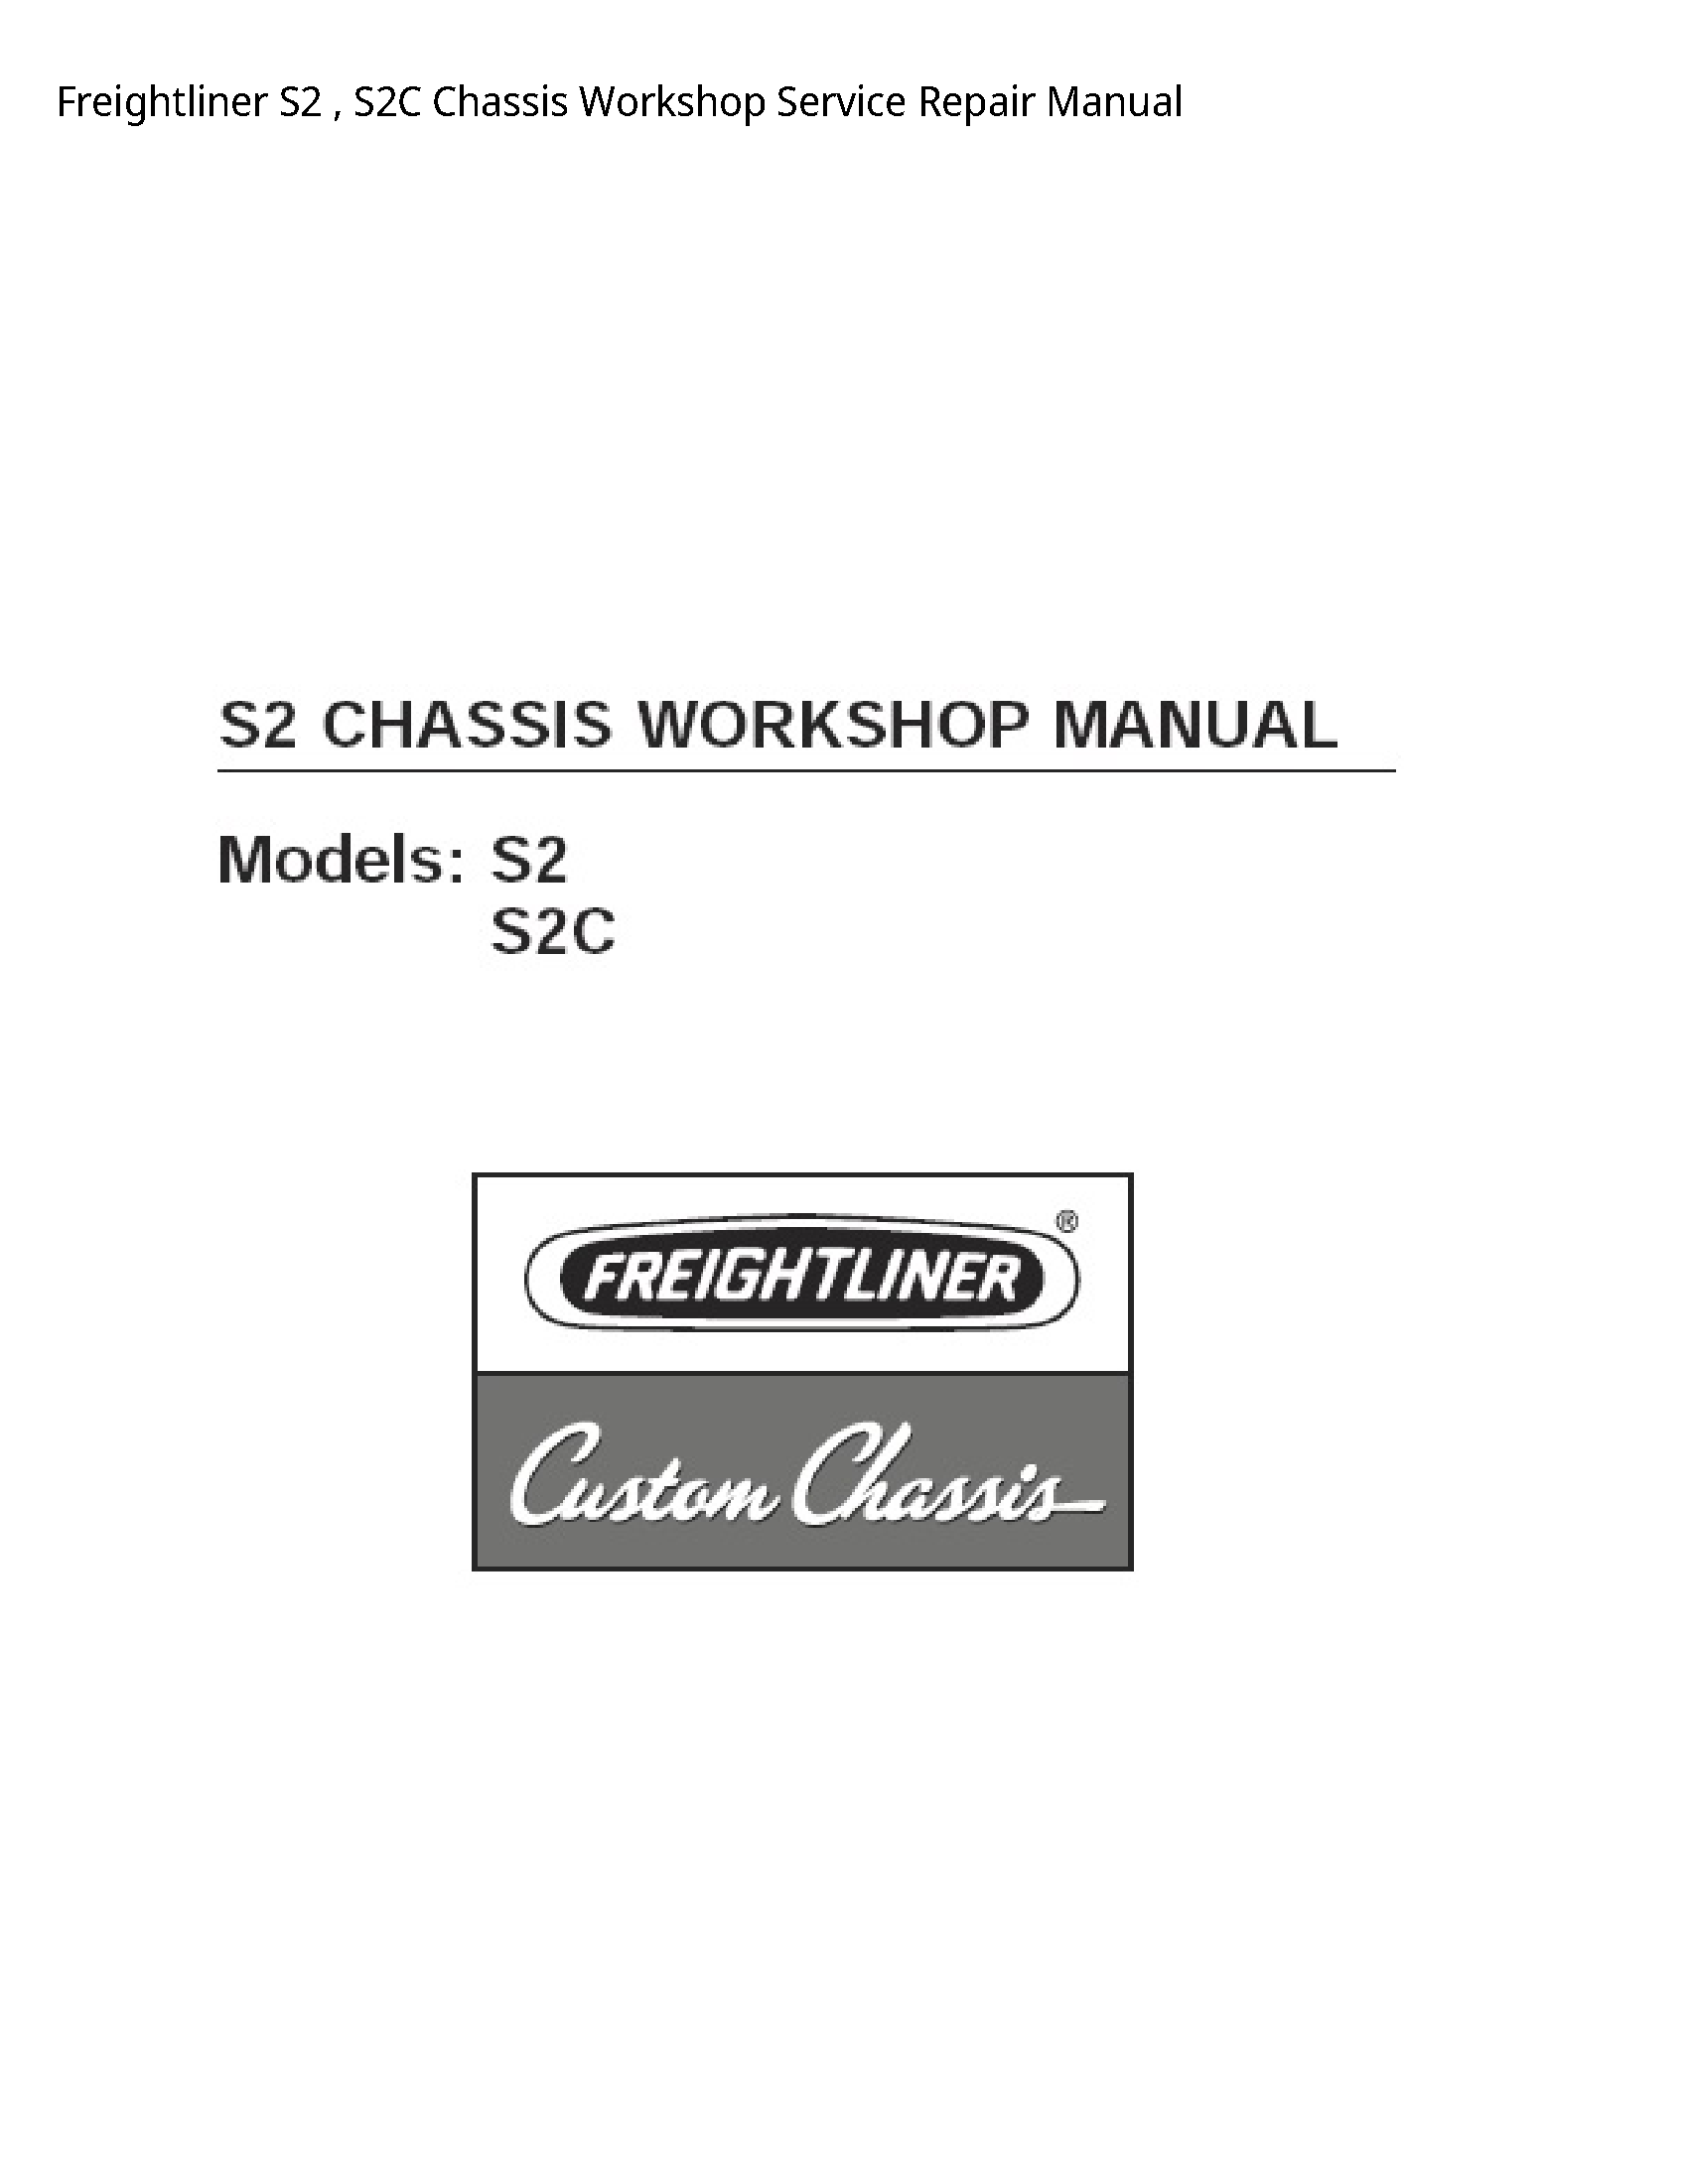 Freightliner S2 Chassis manual